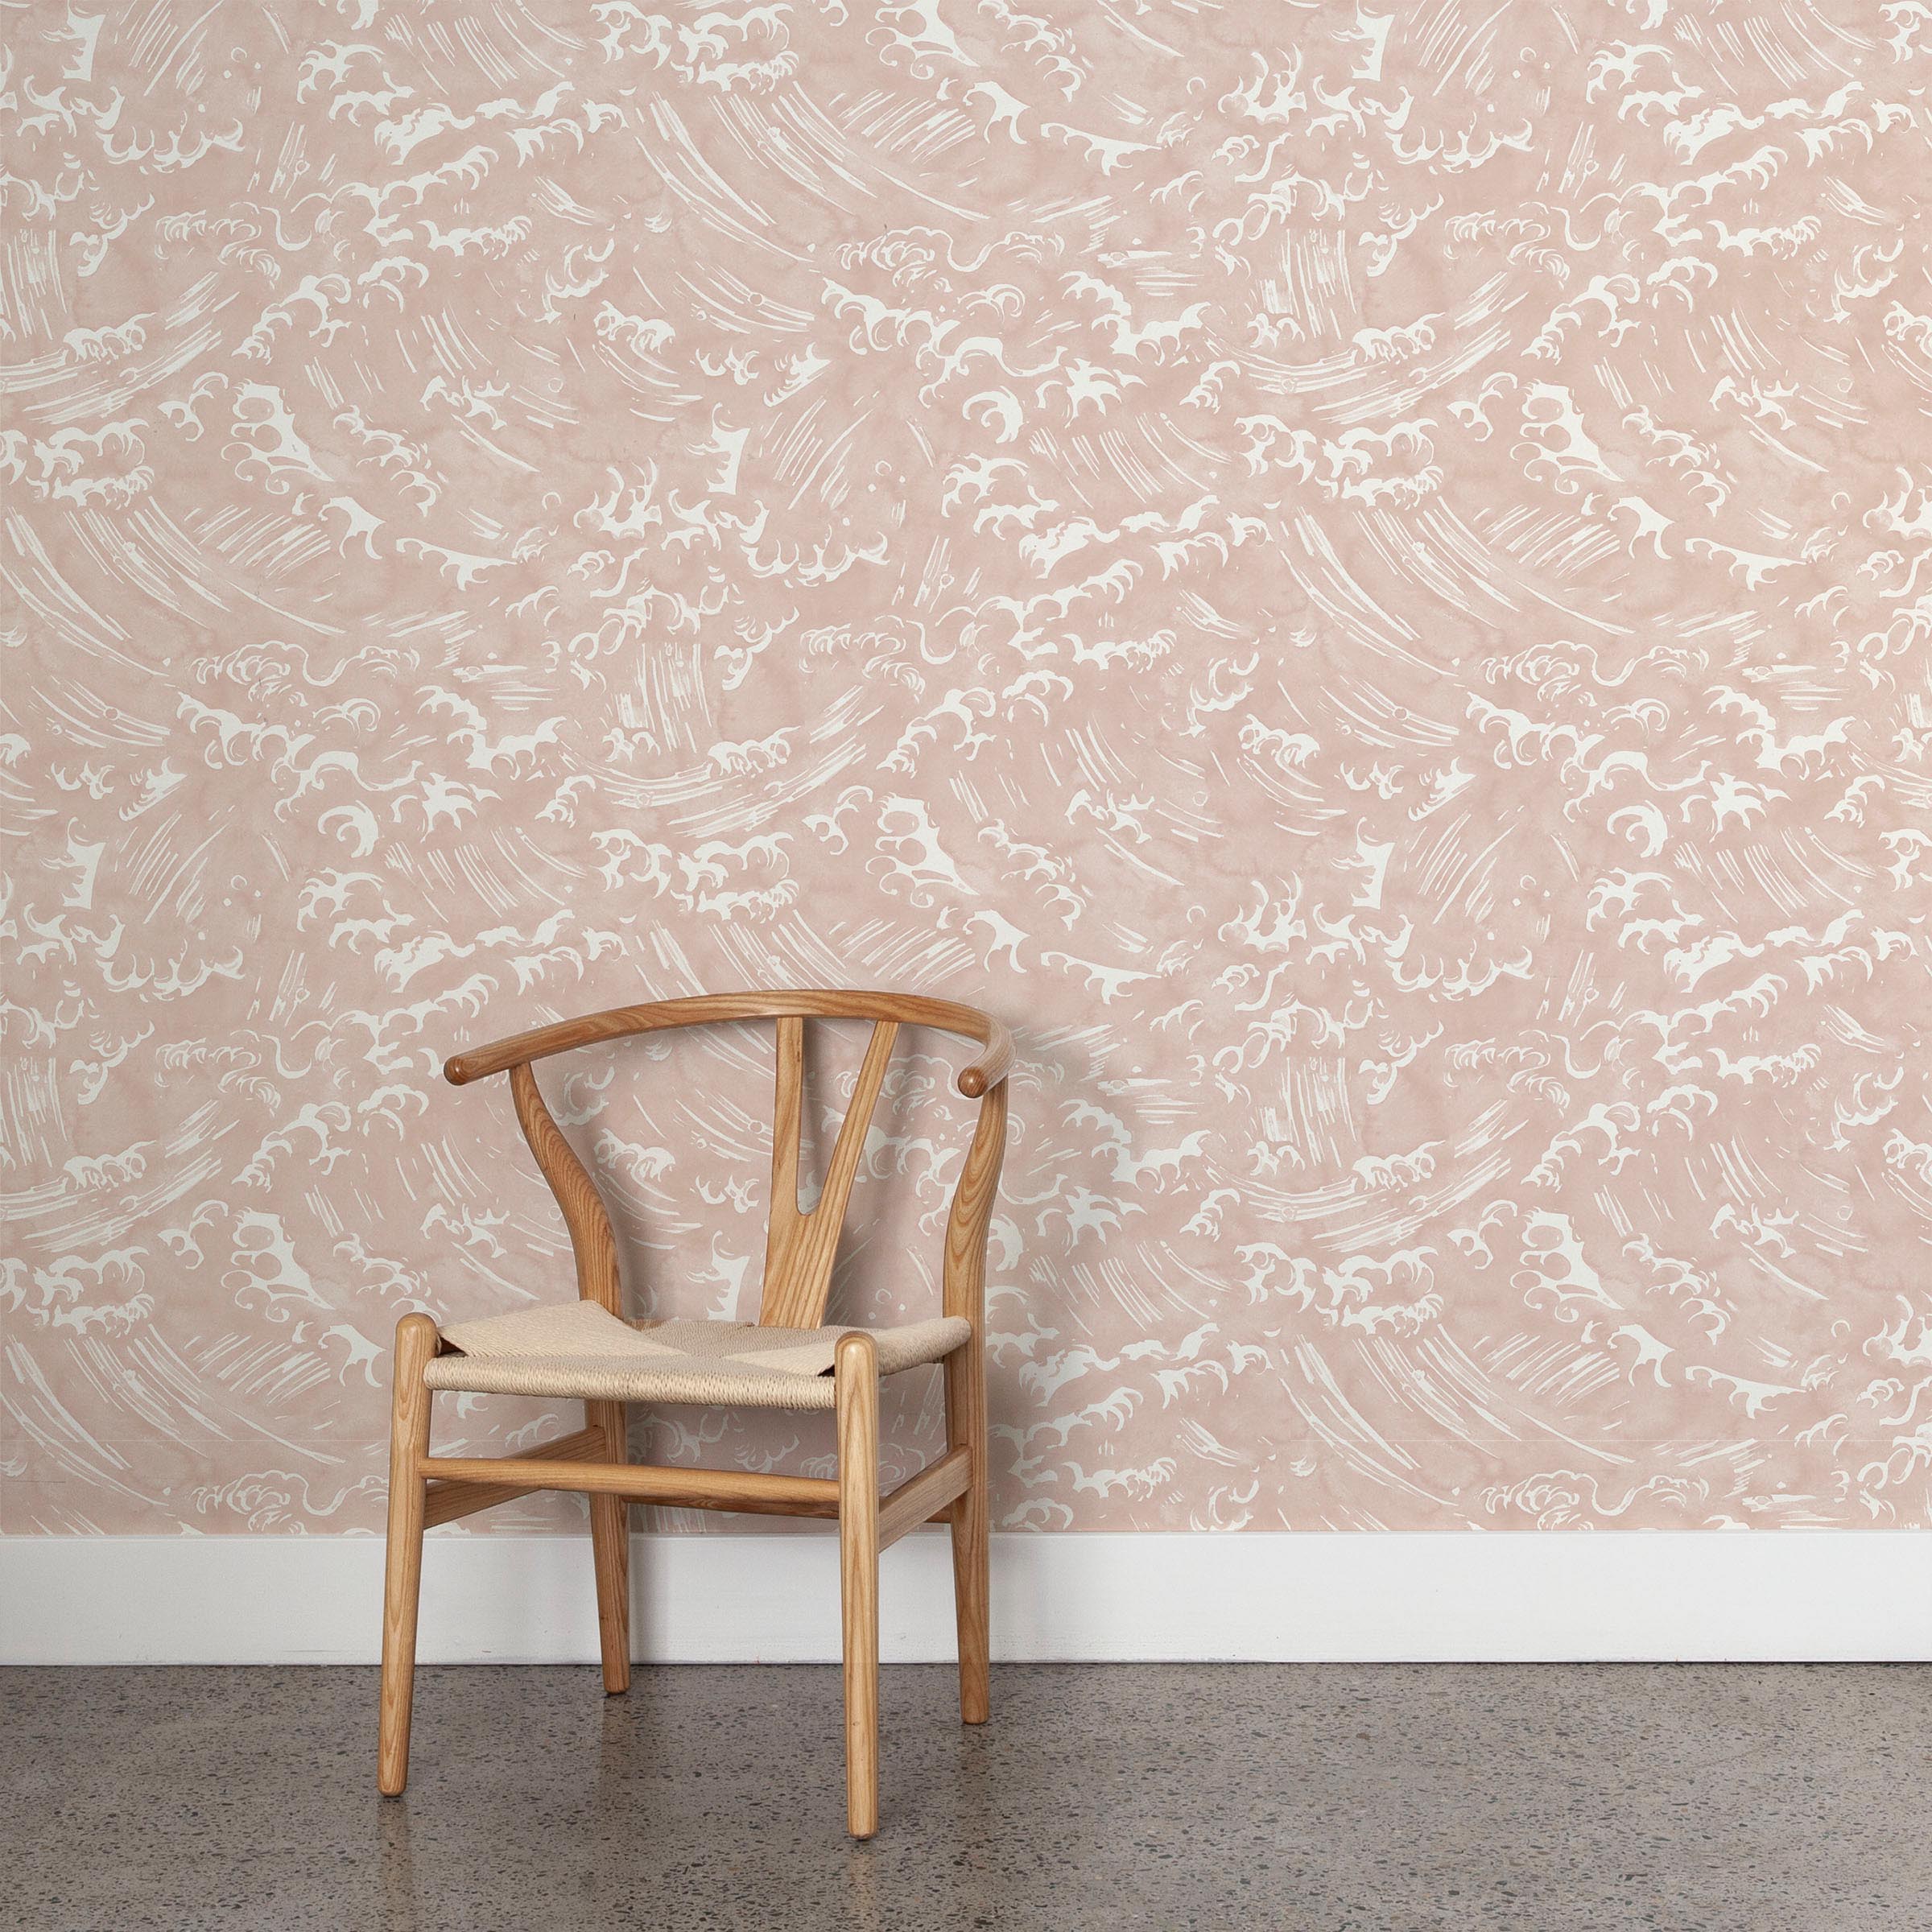 A wooden chair stands in front of a wall papered in a playful wave print in white on a light pink watercolor field.